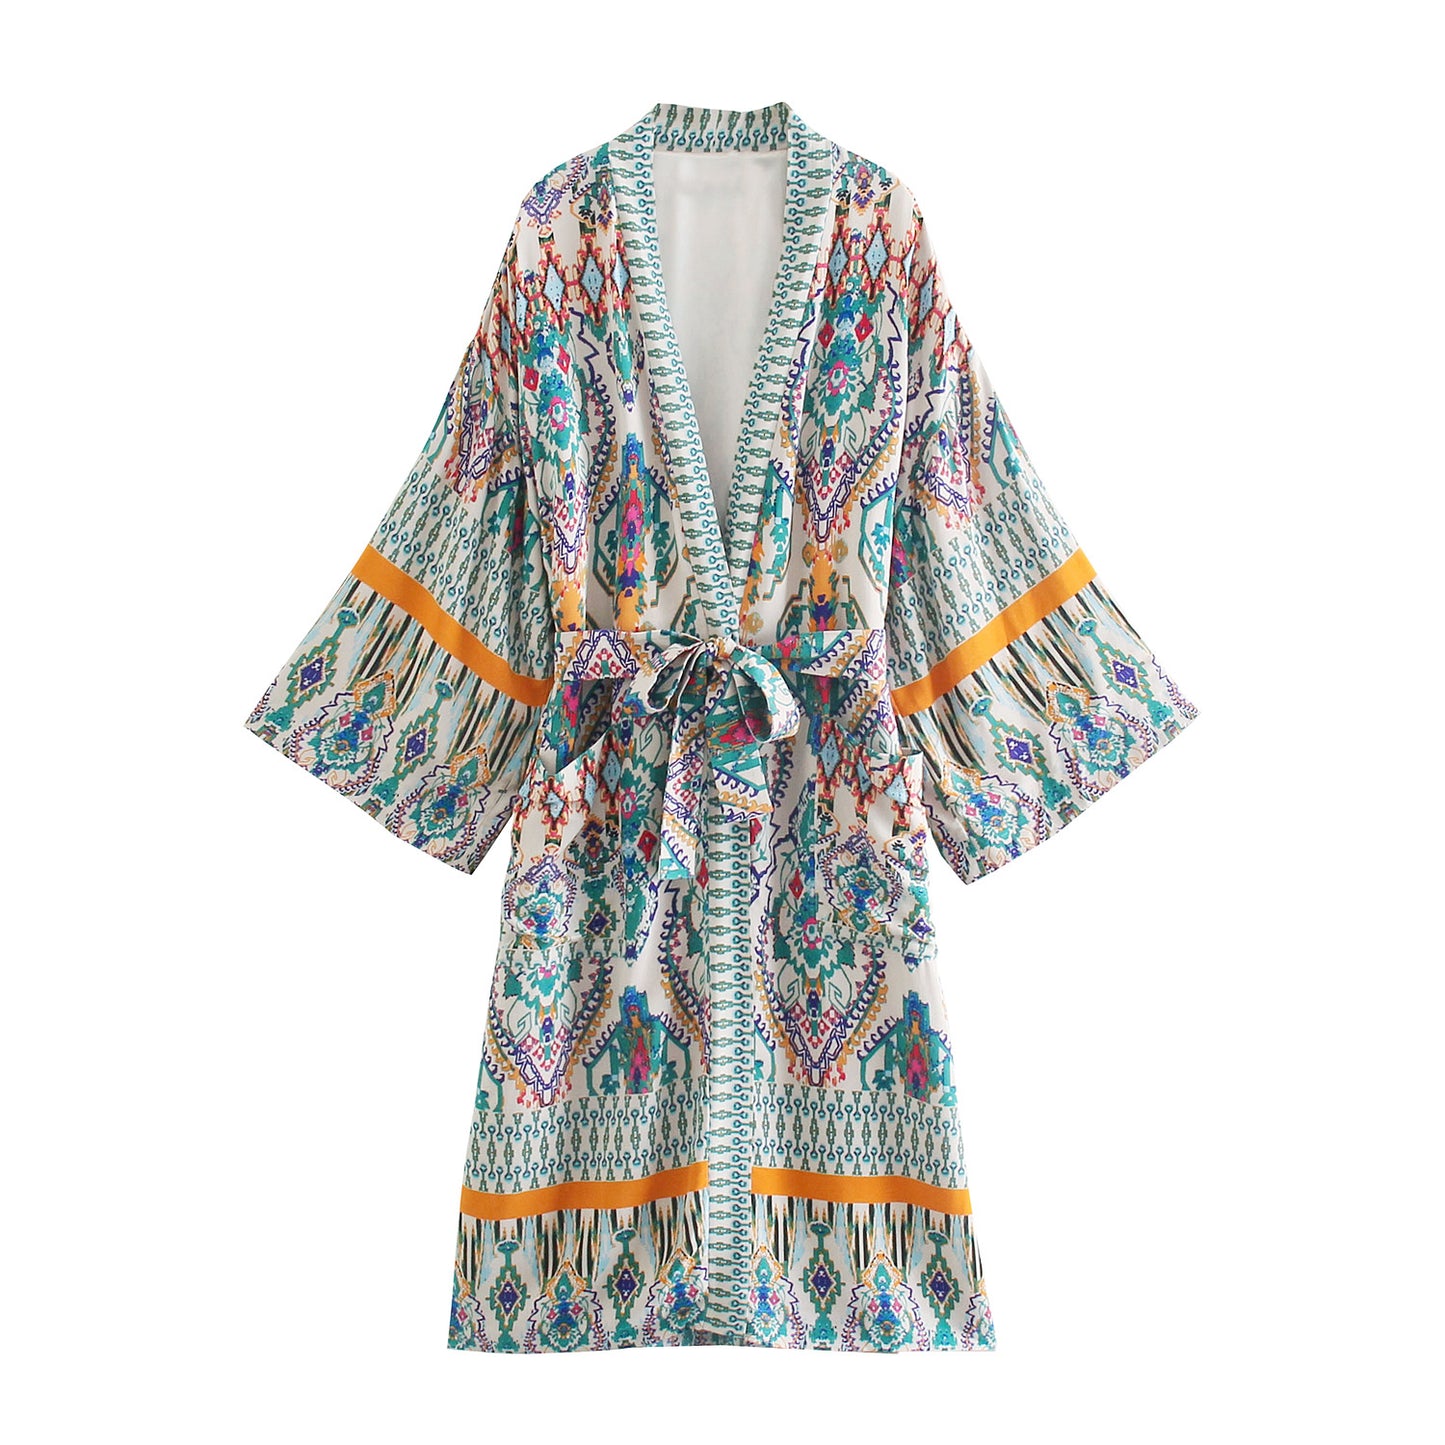 New European And American Style Printed Wide Loose Long Kimono Suit Jacket